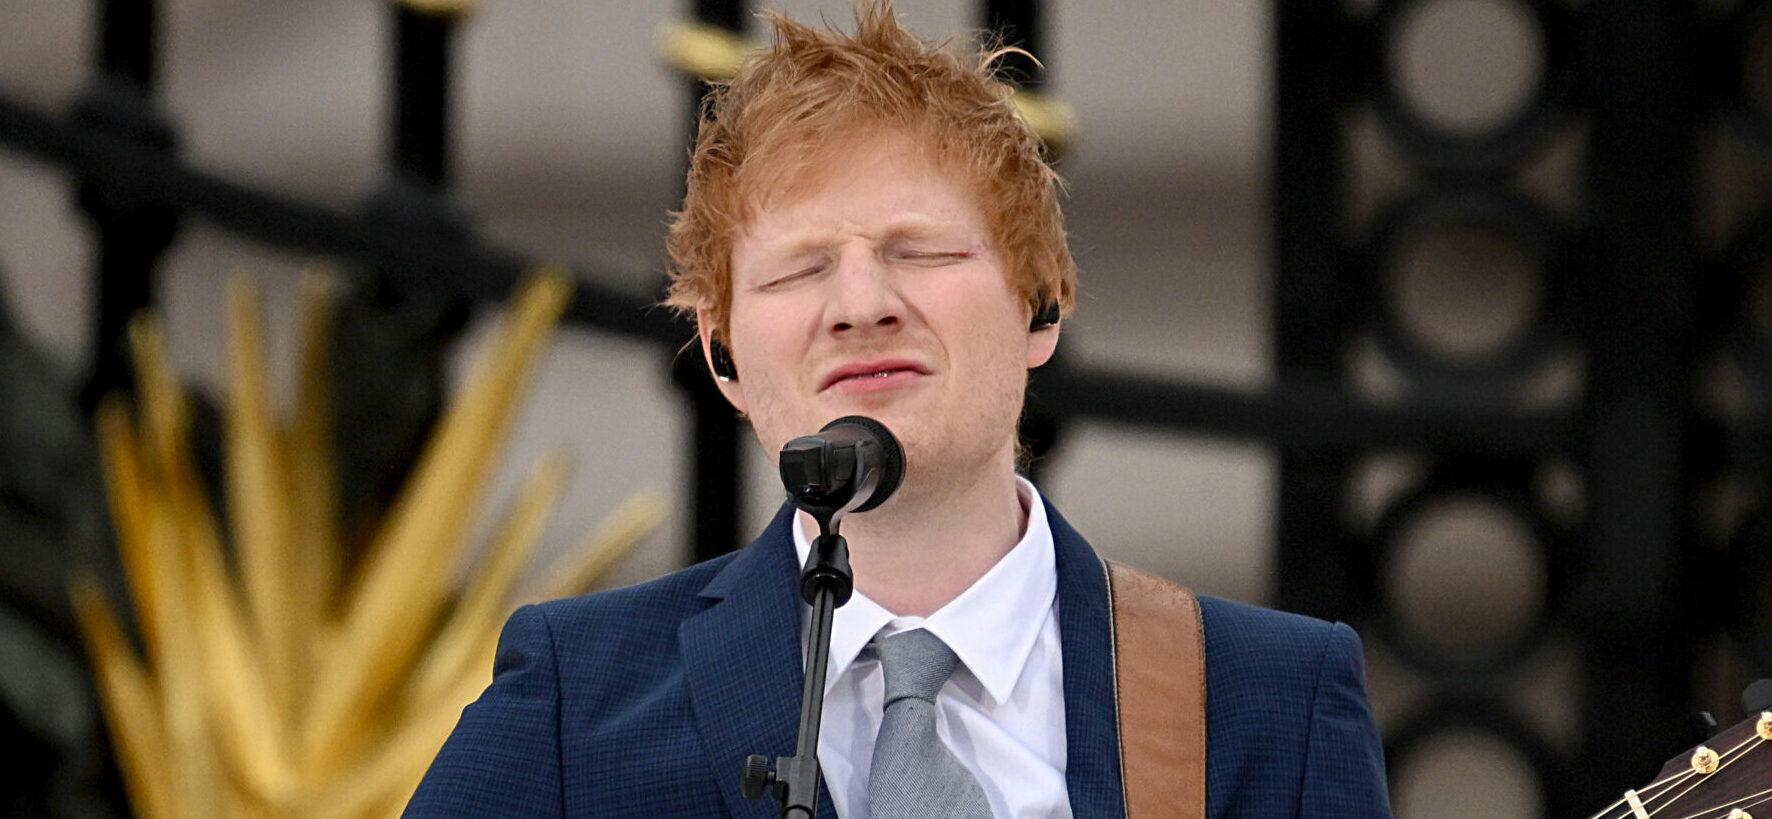 Ed Sheeran Promises To Never Take Drugs As It Would Be ‘Disrespectful’ To His Late Pal’s Memory